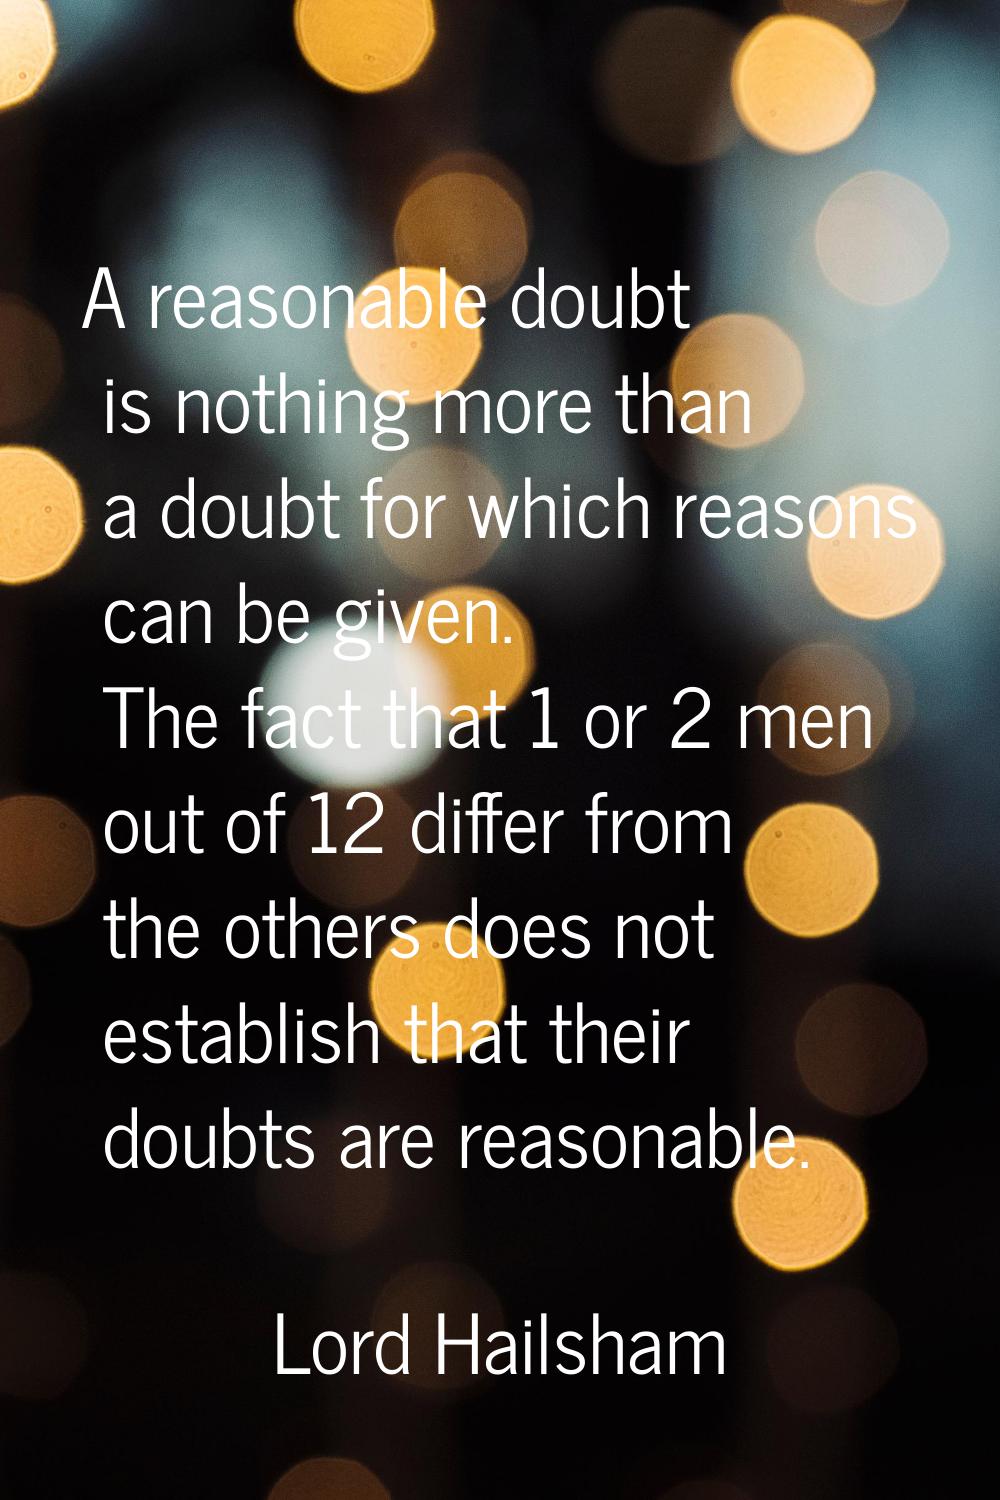 A reasonable doubt is nothing more than a doubt for which reasons can be given. The fact that 1 or 